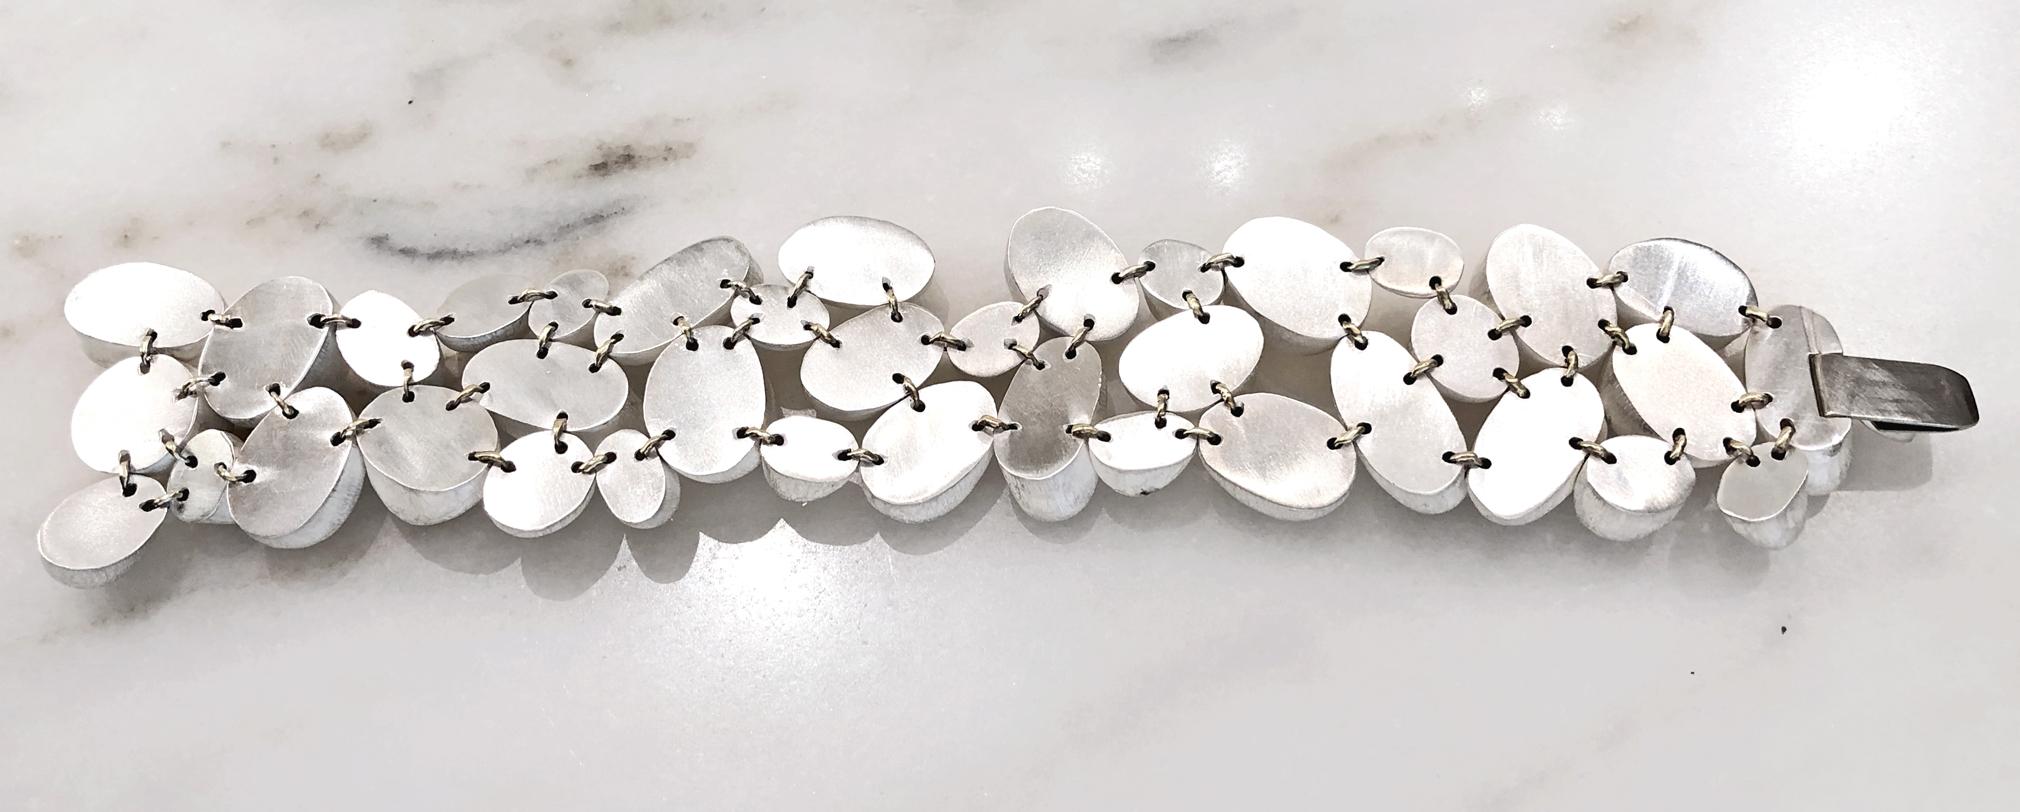 Contemporary John Iversen Collector's One of a Kind Silver Pebble Shells Handmade Bracelet